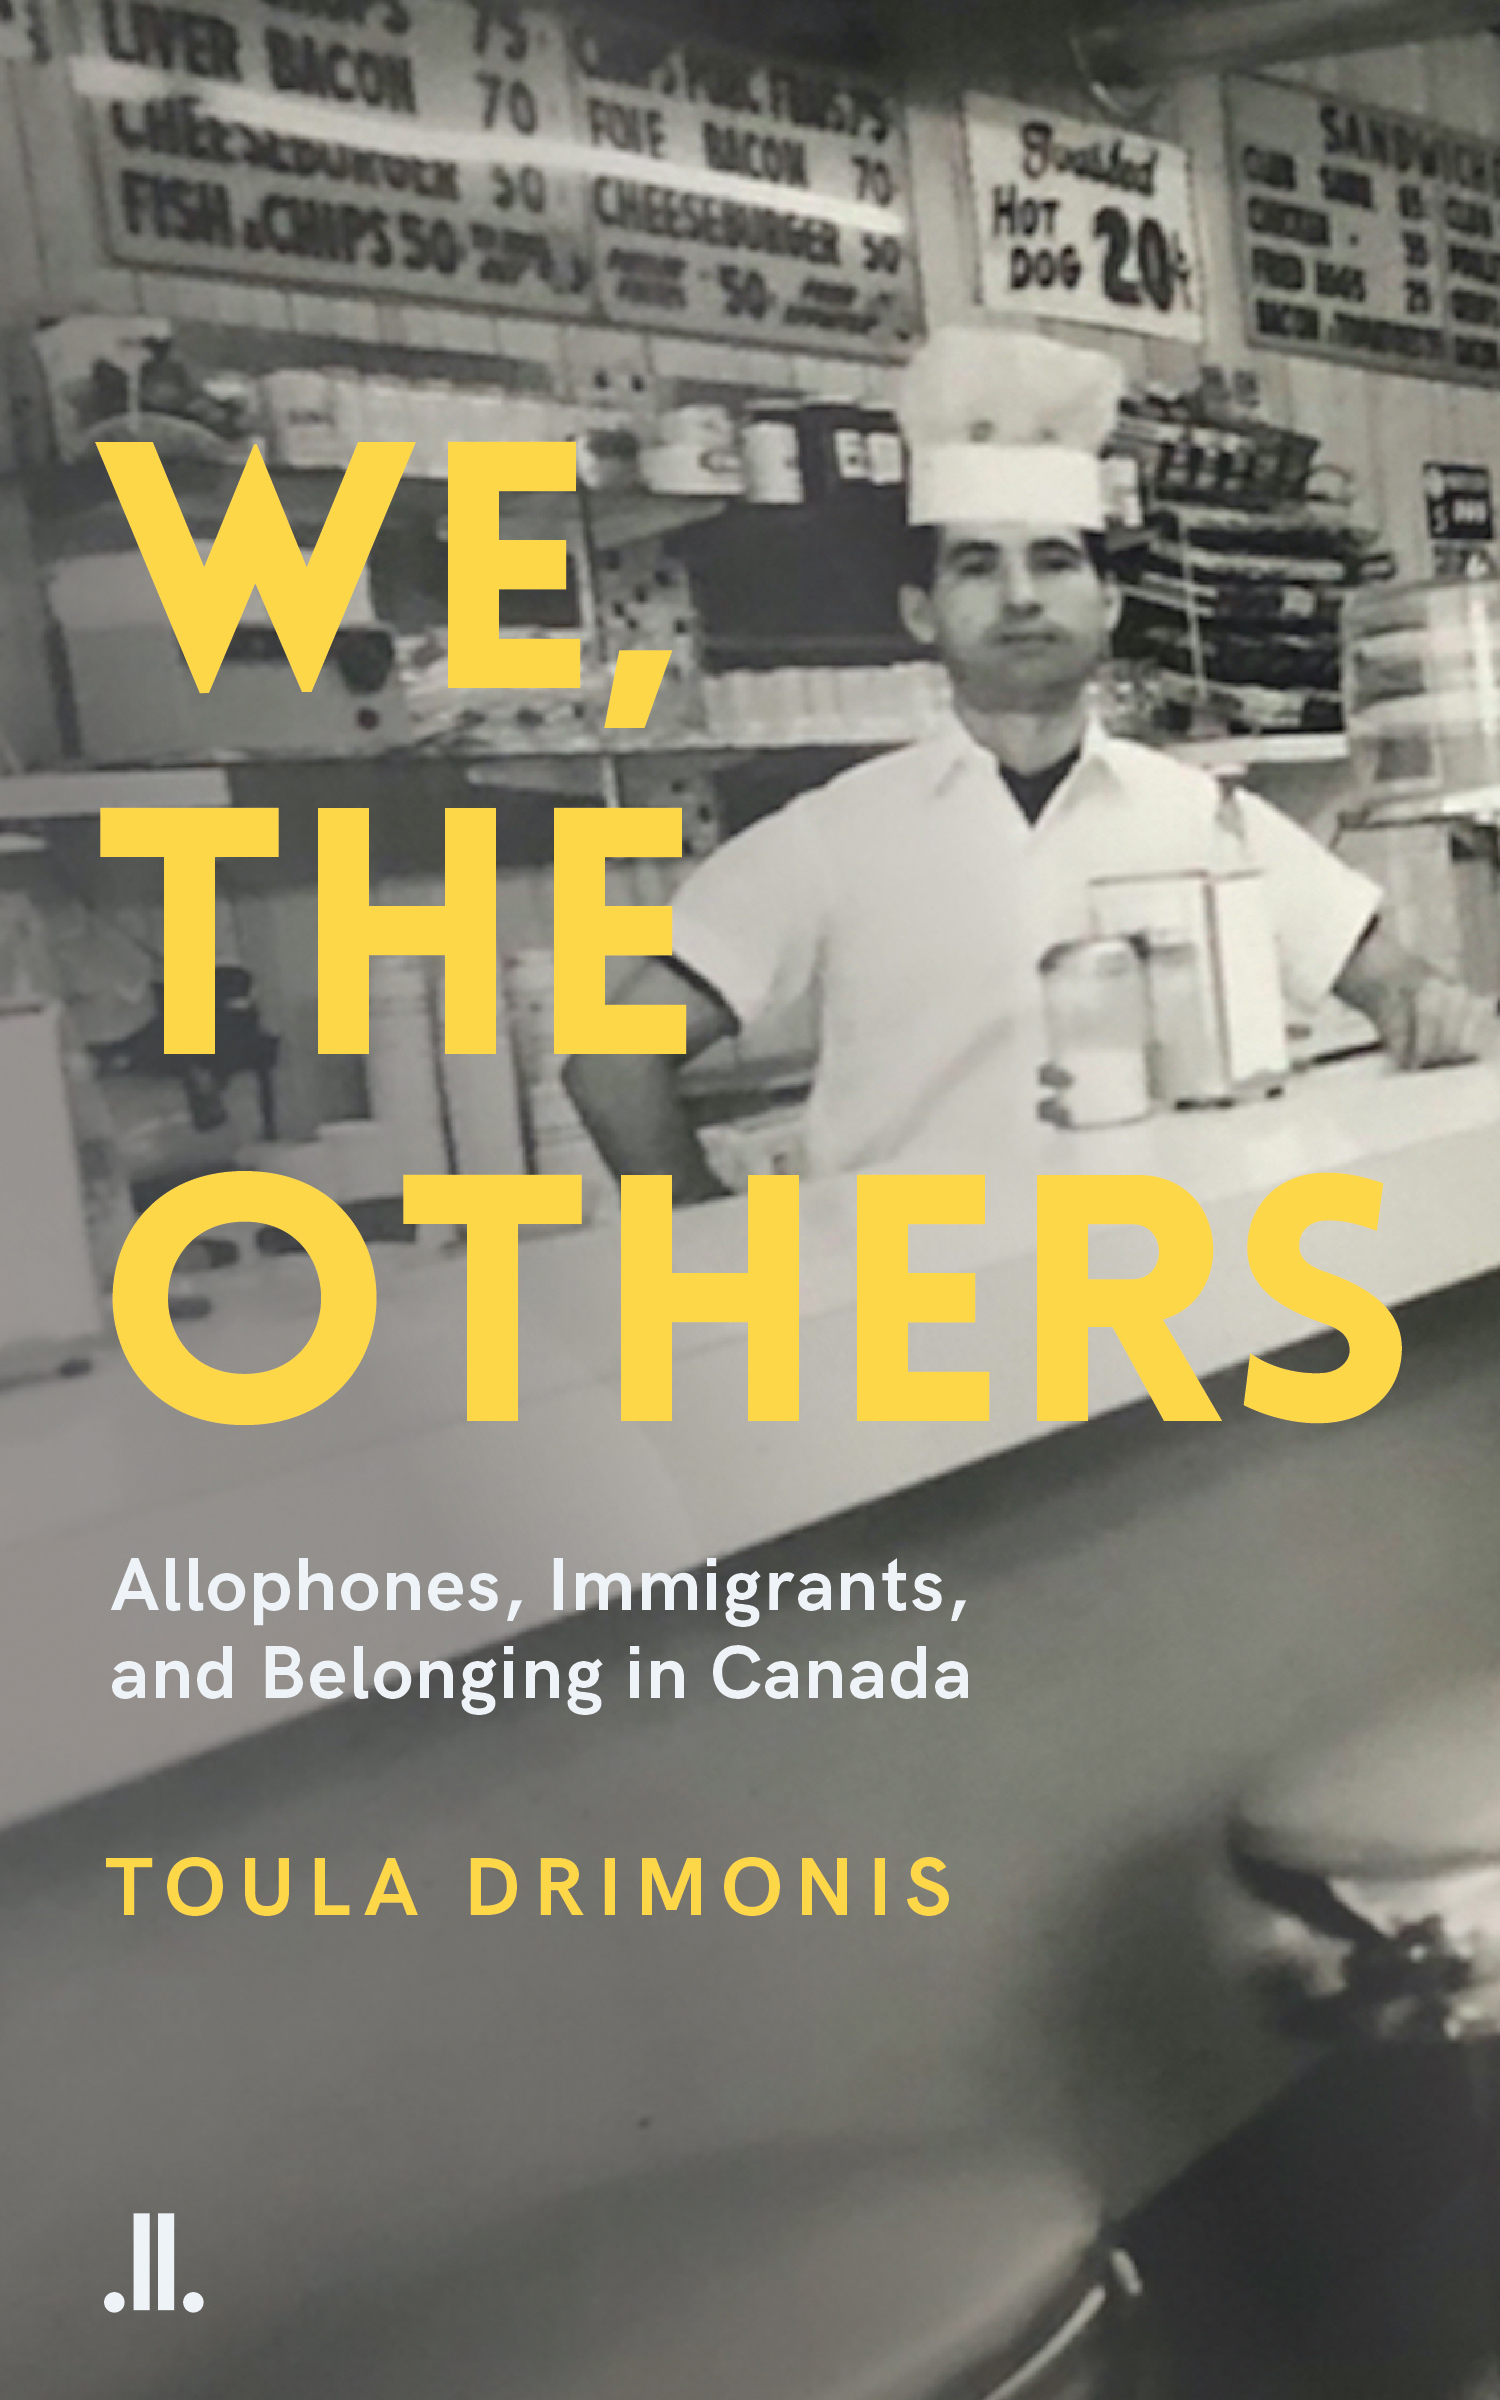 We, the Others: Allophones, Immigrants, and Belonging in Canada